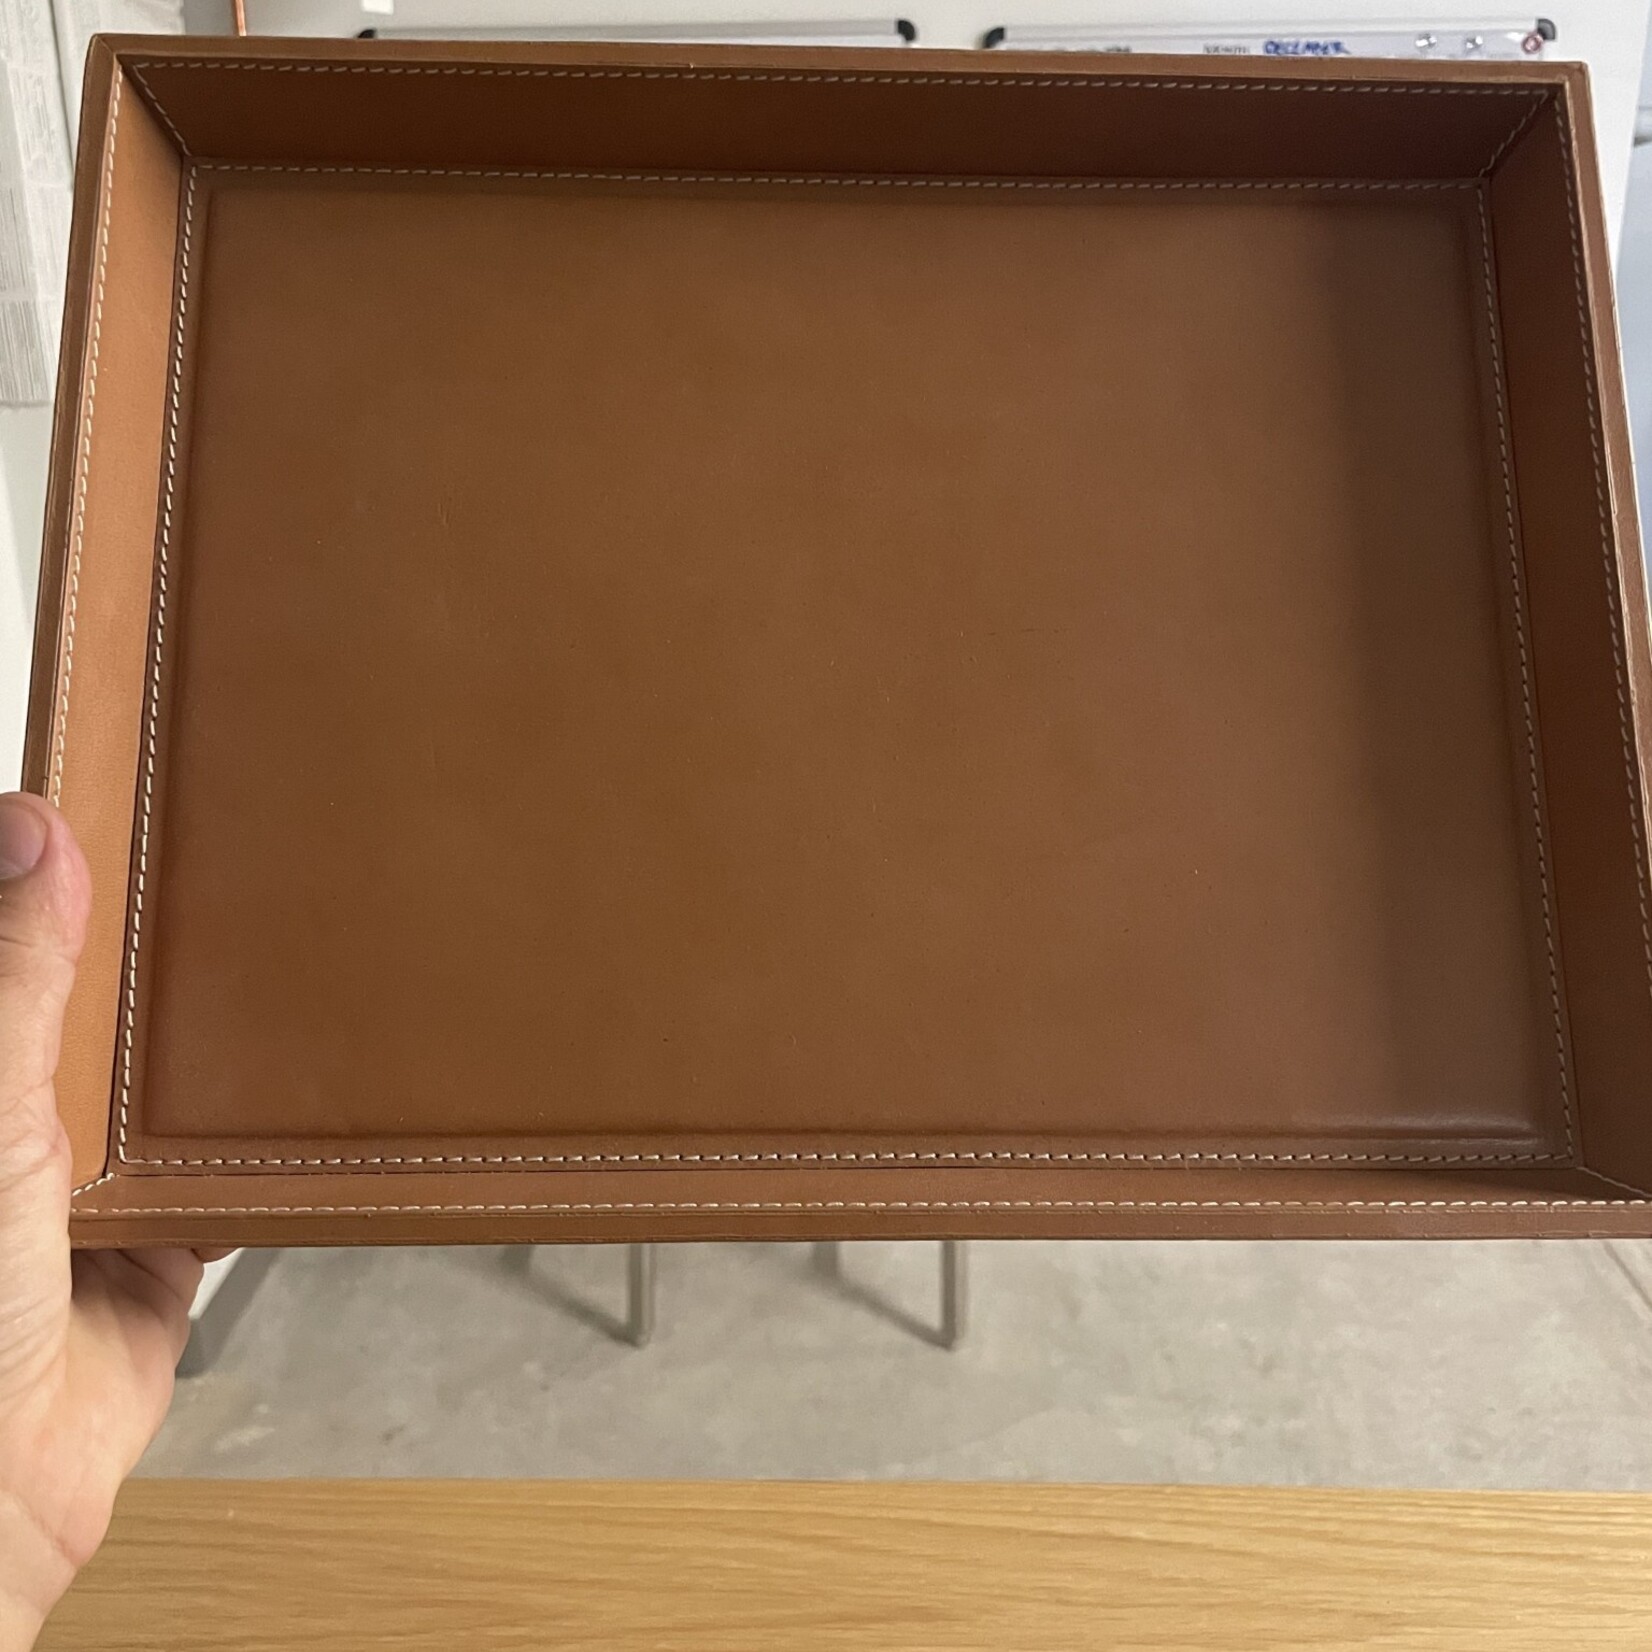 Lorient, G3 Square Tray, Aged Camel Full-Grain Leather